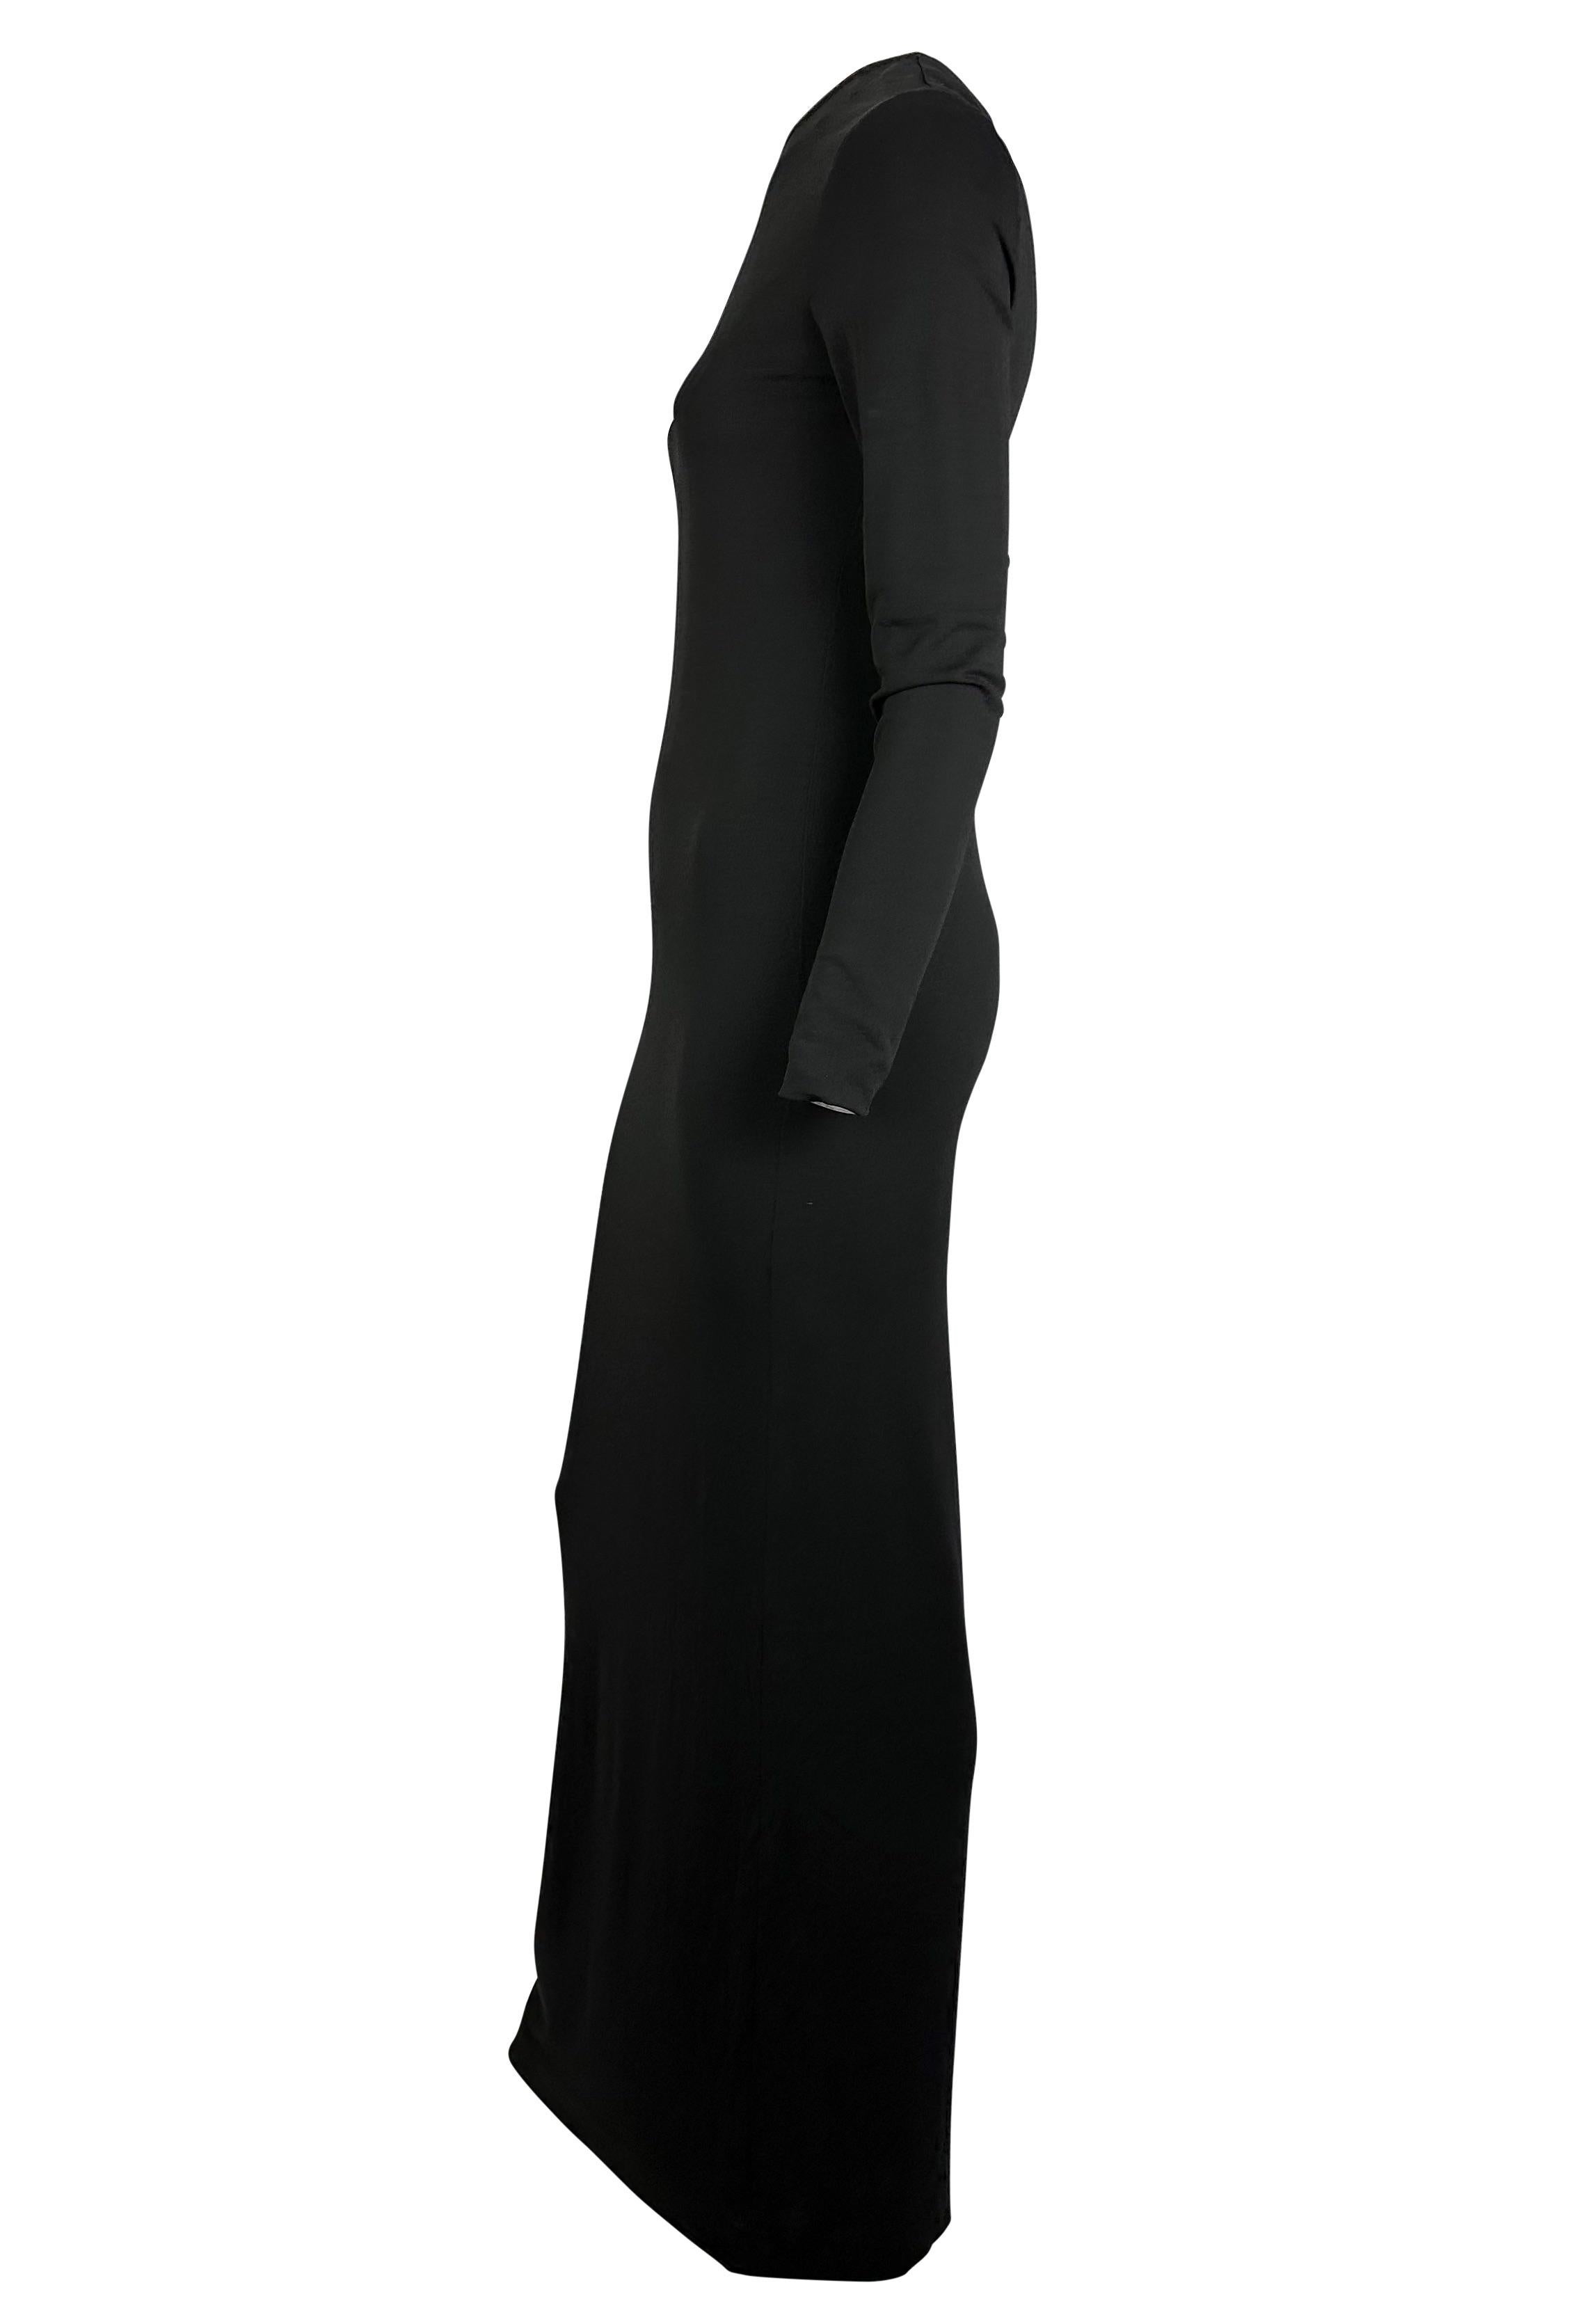 NWT S/S 1998 Gucci by Tom Ford Asymmetric Neckline Black Jersey Stretch Gown In New Condition For Sale In West Hollywood, CA